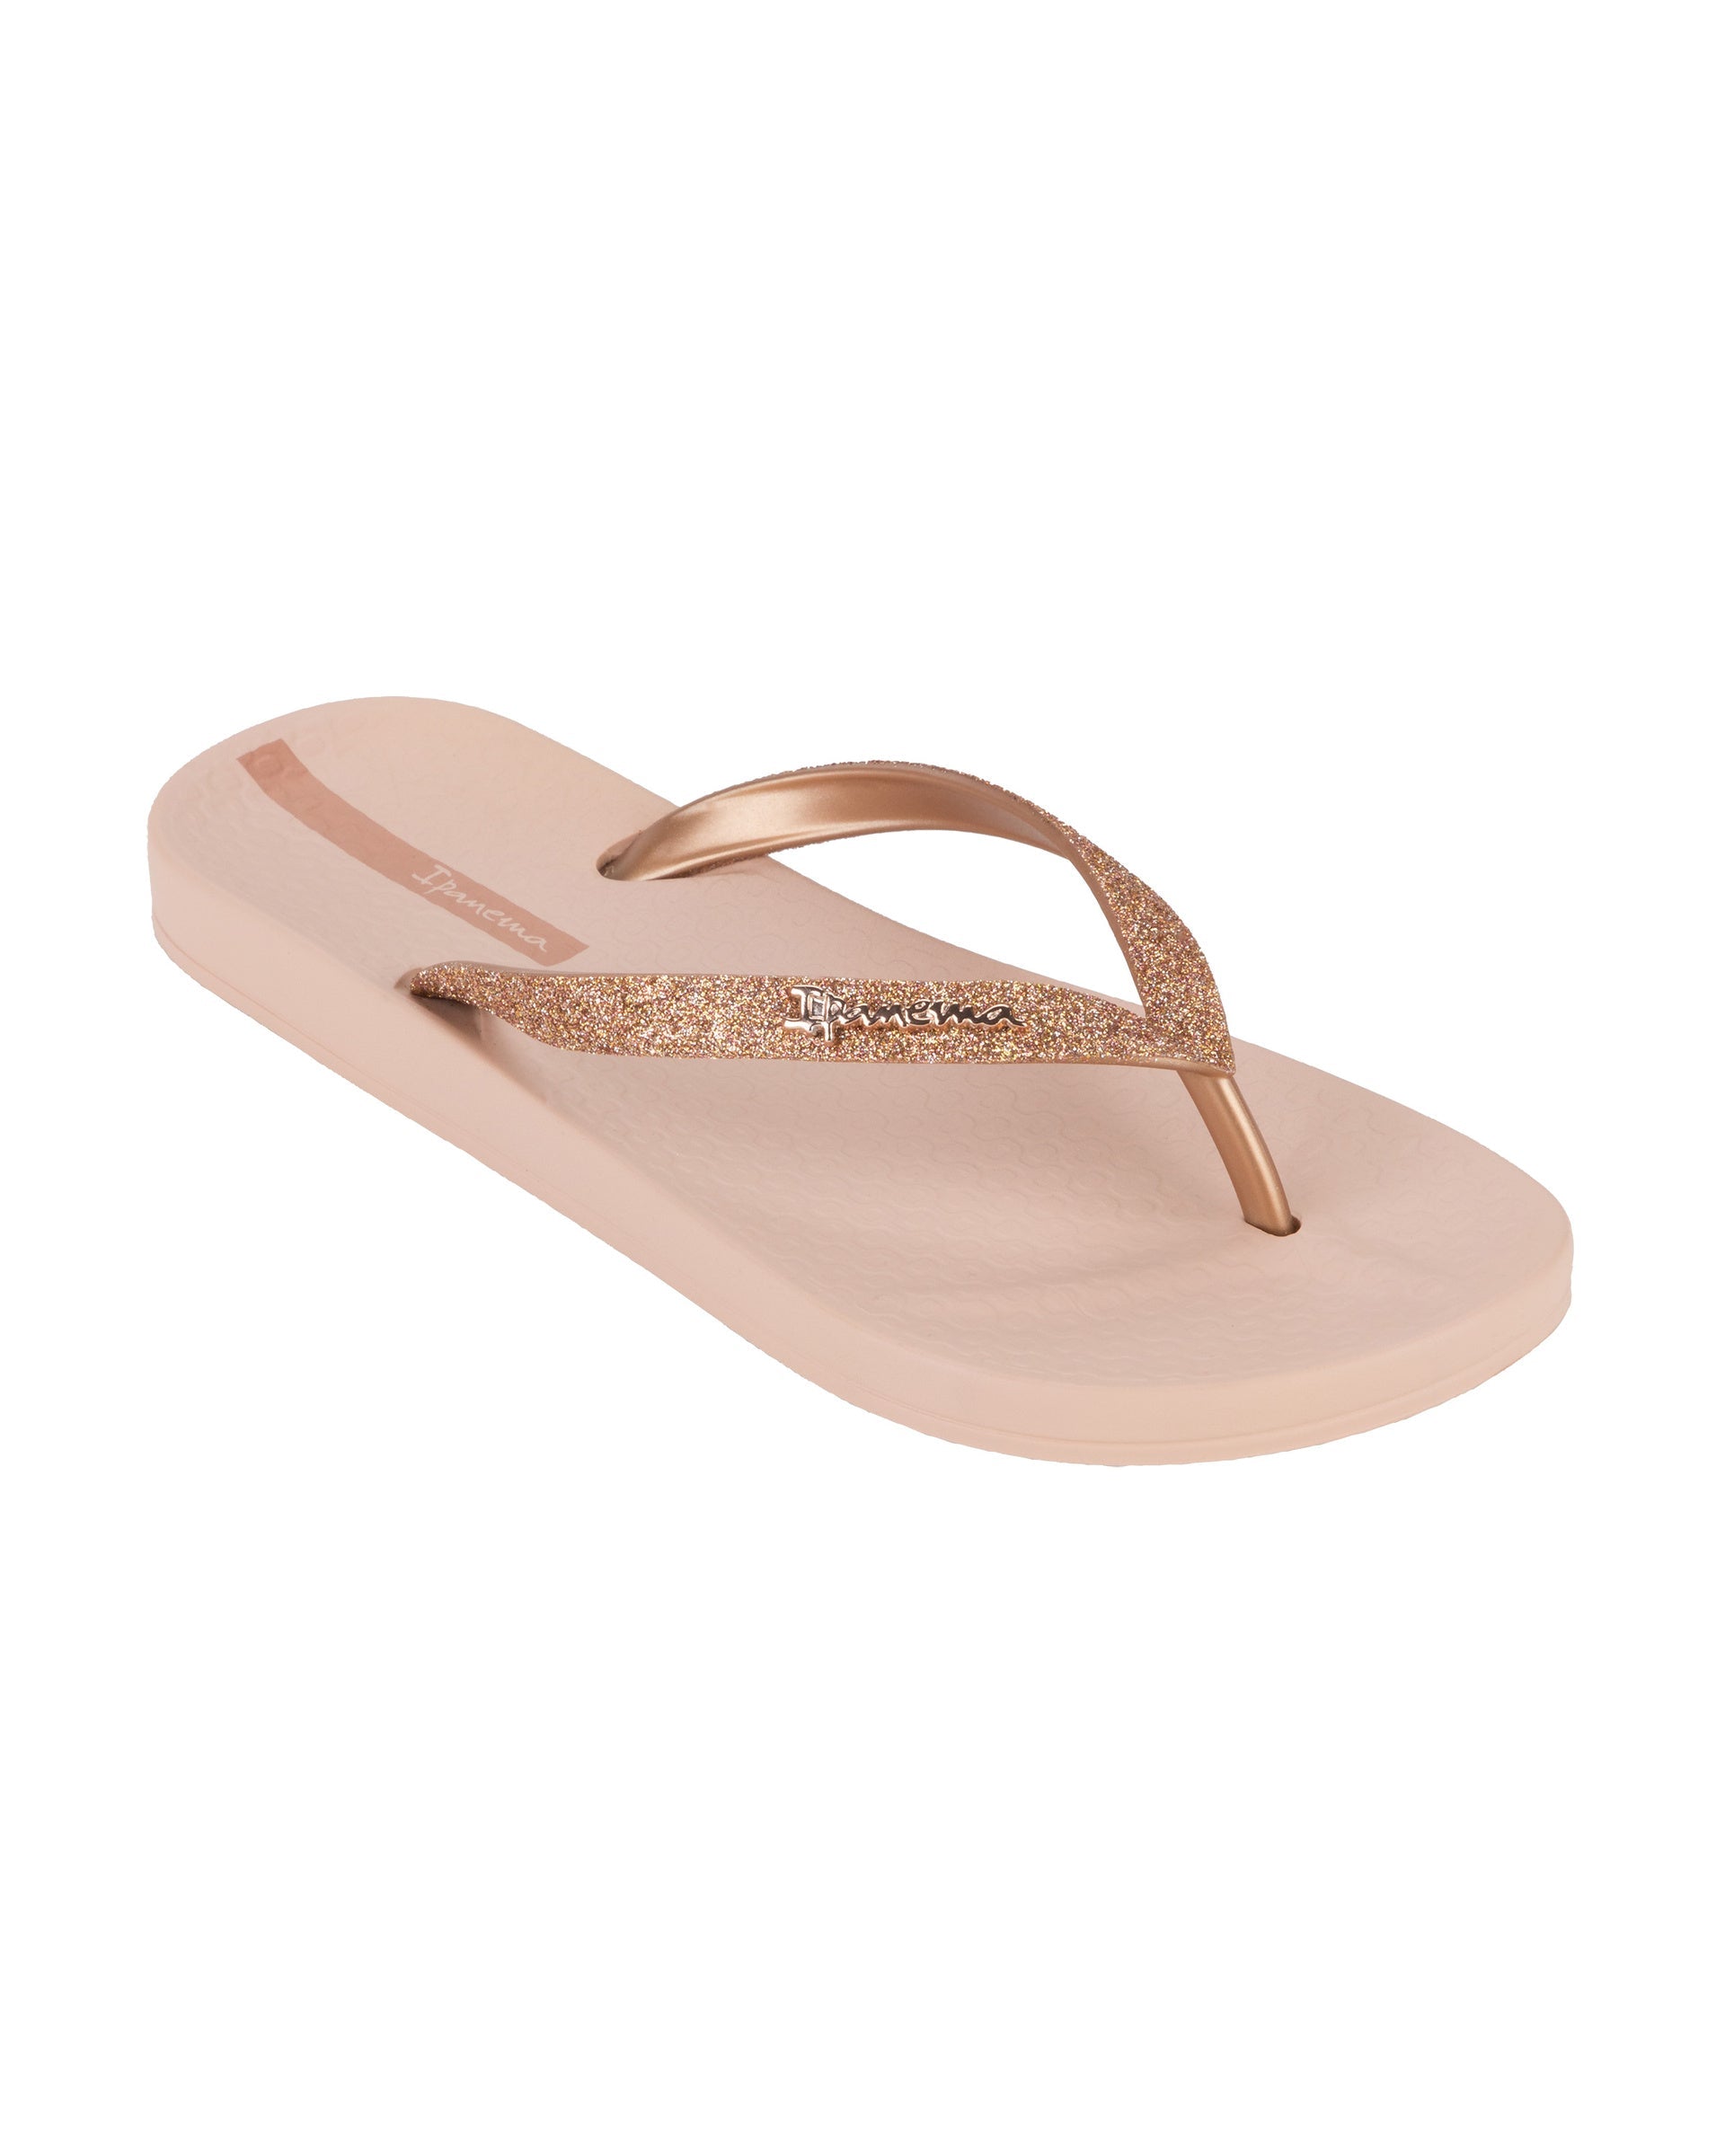 Angled view of a pink Ipanema Ana Sparkle women's flip flop with glitter rose gold straps.